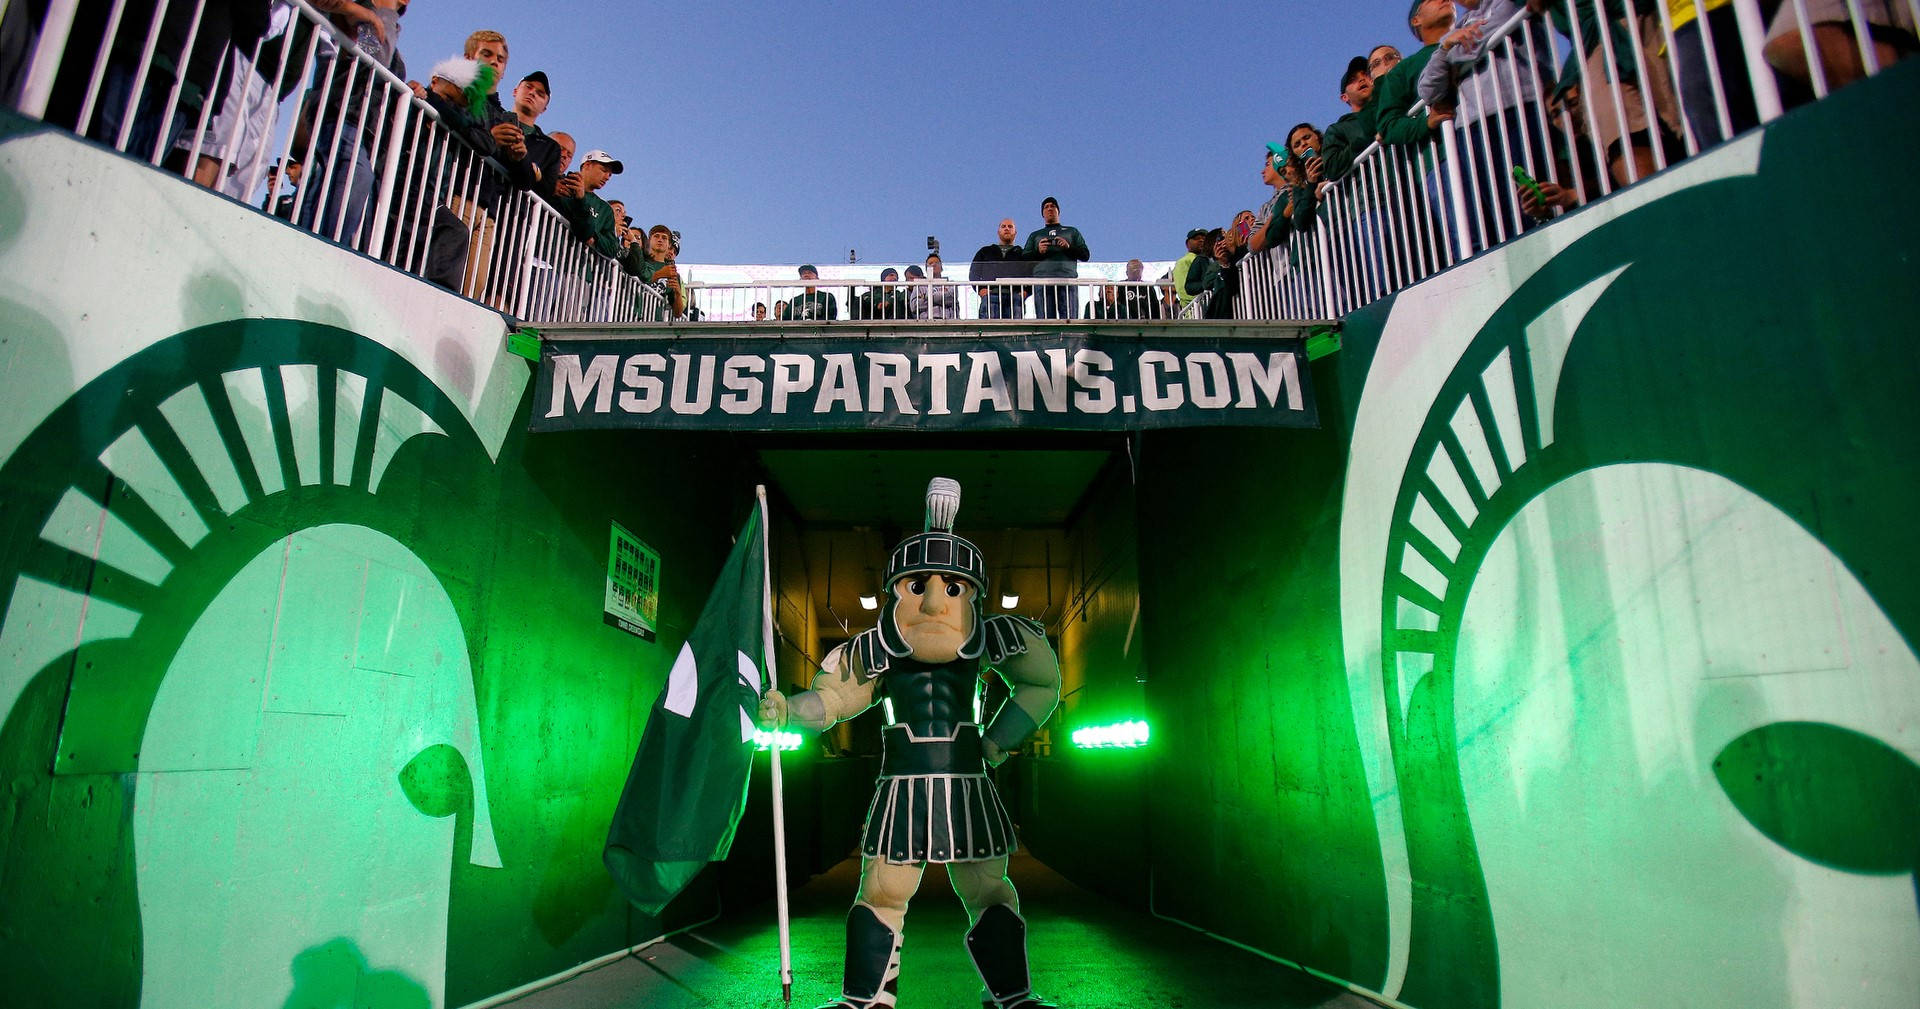 Michigan State University's Spartan Mascot In Action